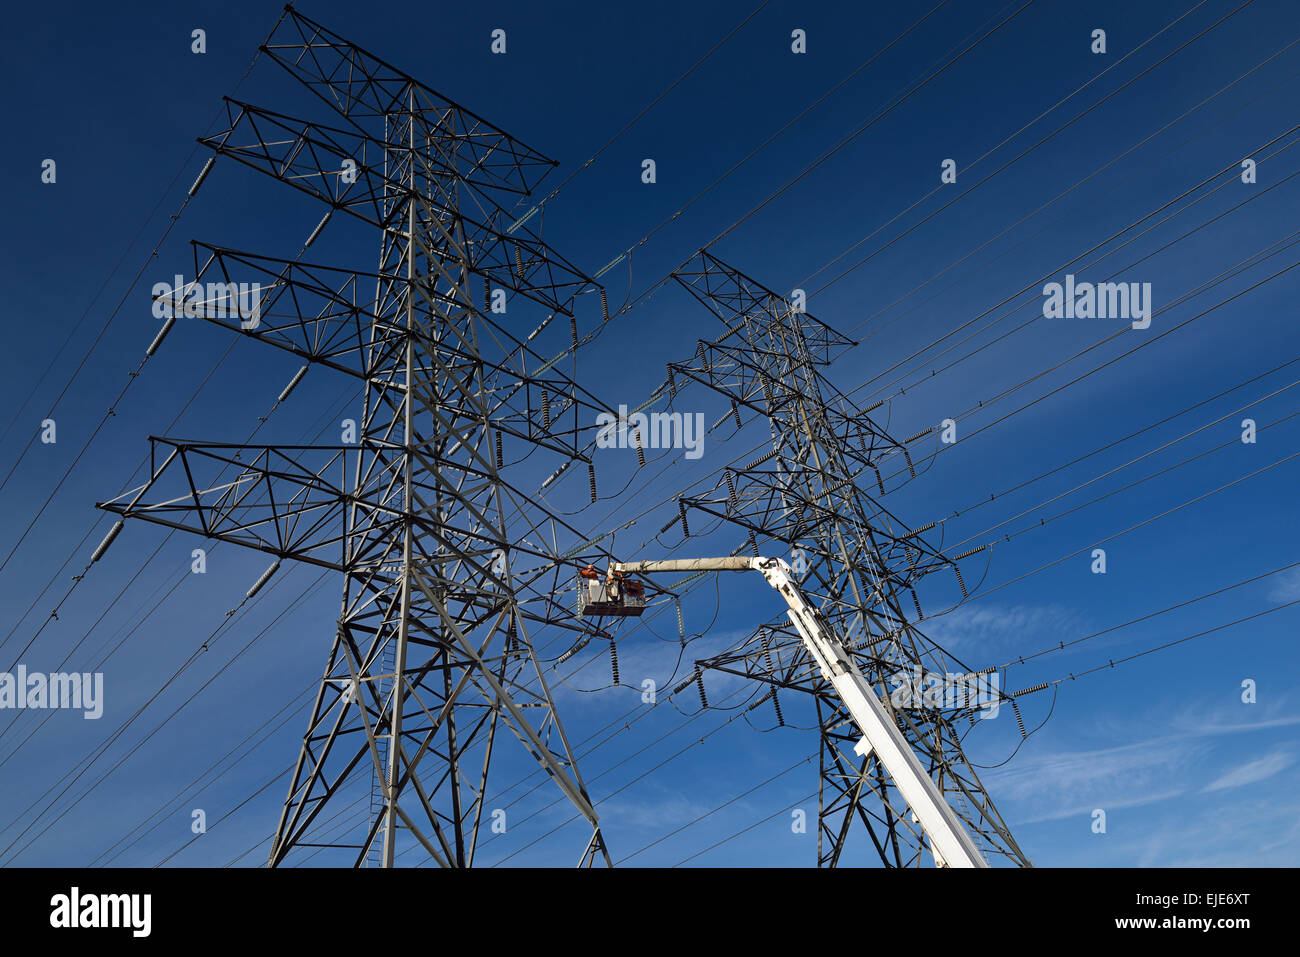 Hydro linemen on large cherry picker working on a double circuit high tension power line steel towers Toronto with blue sky Stock Photo